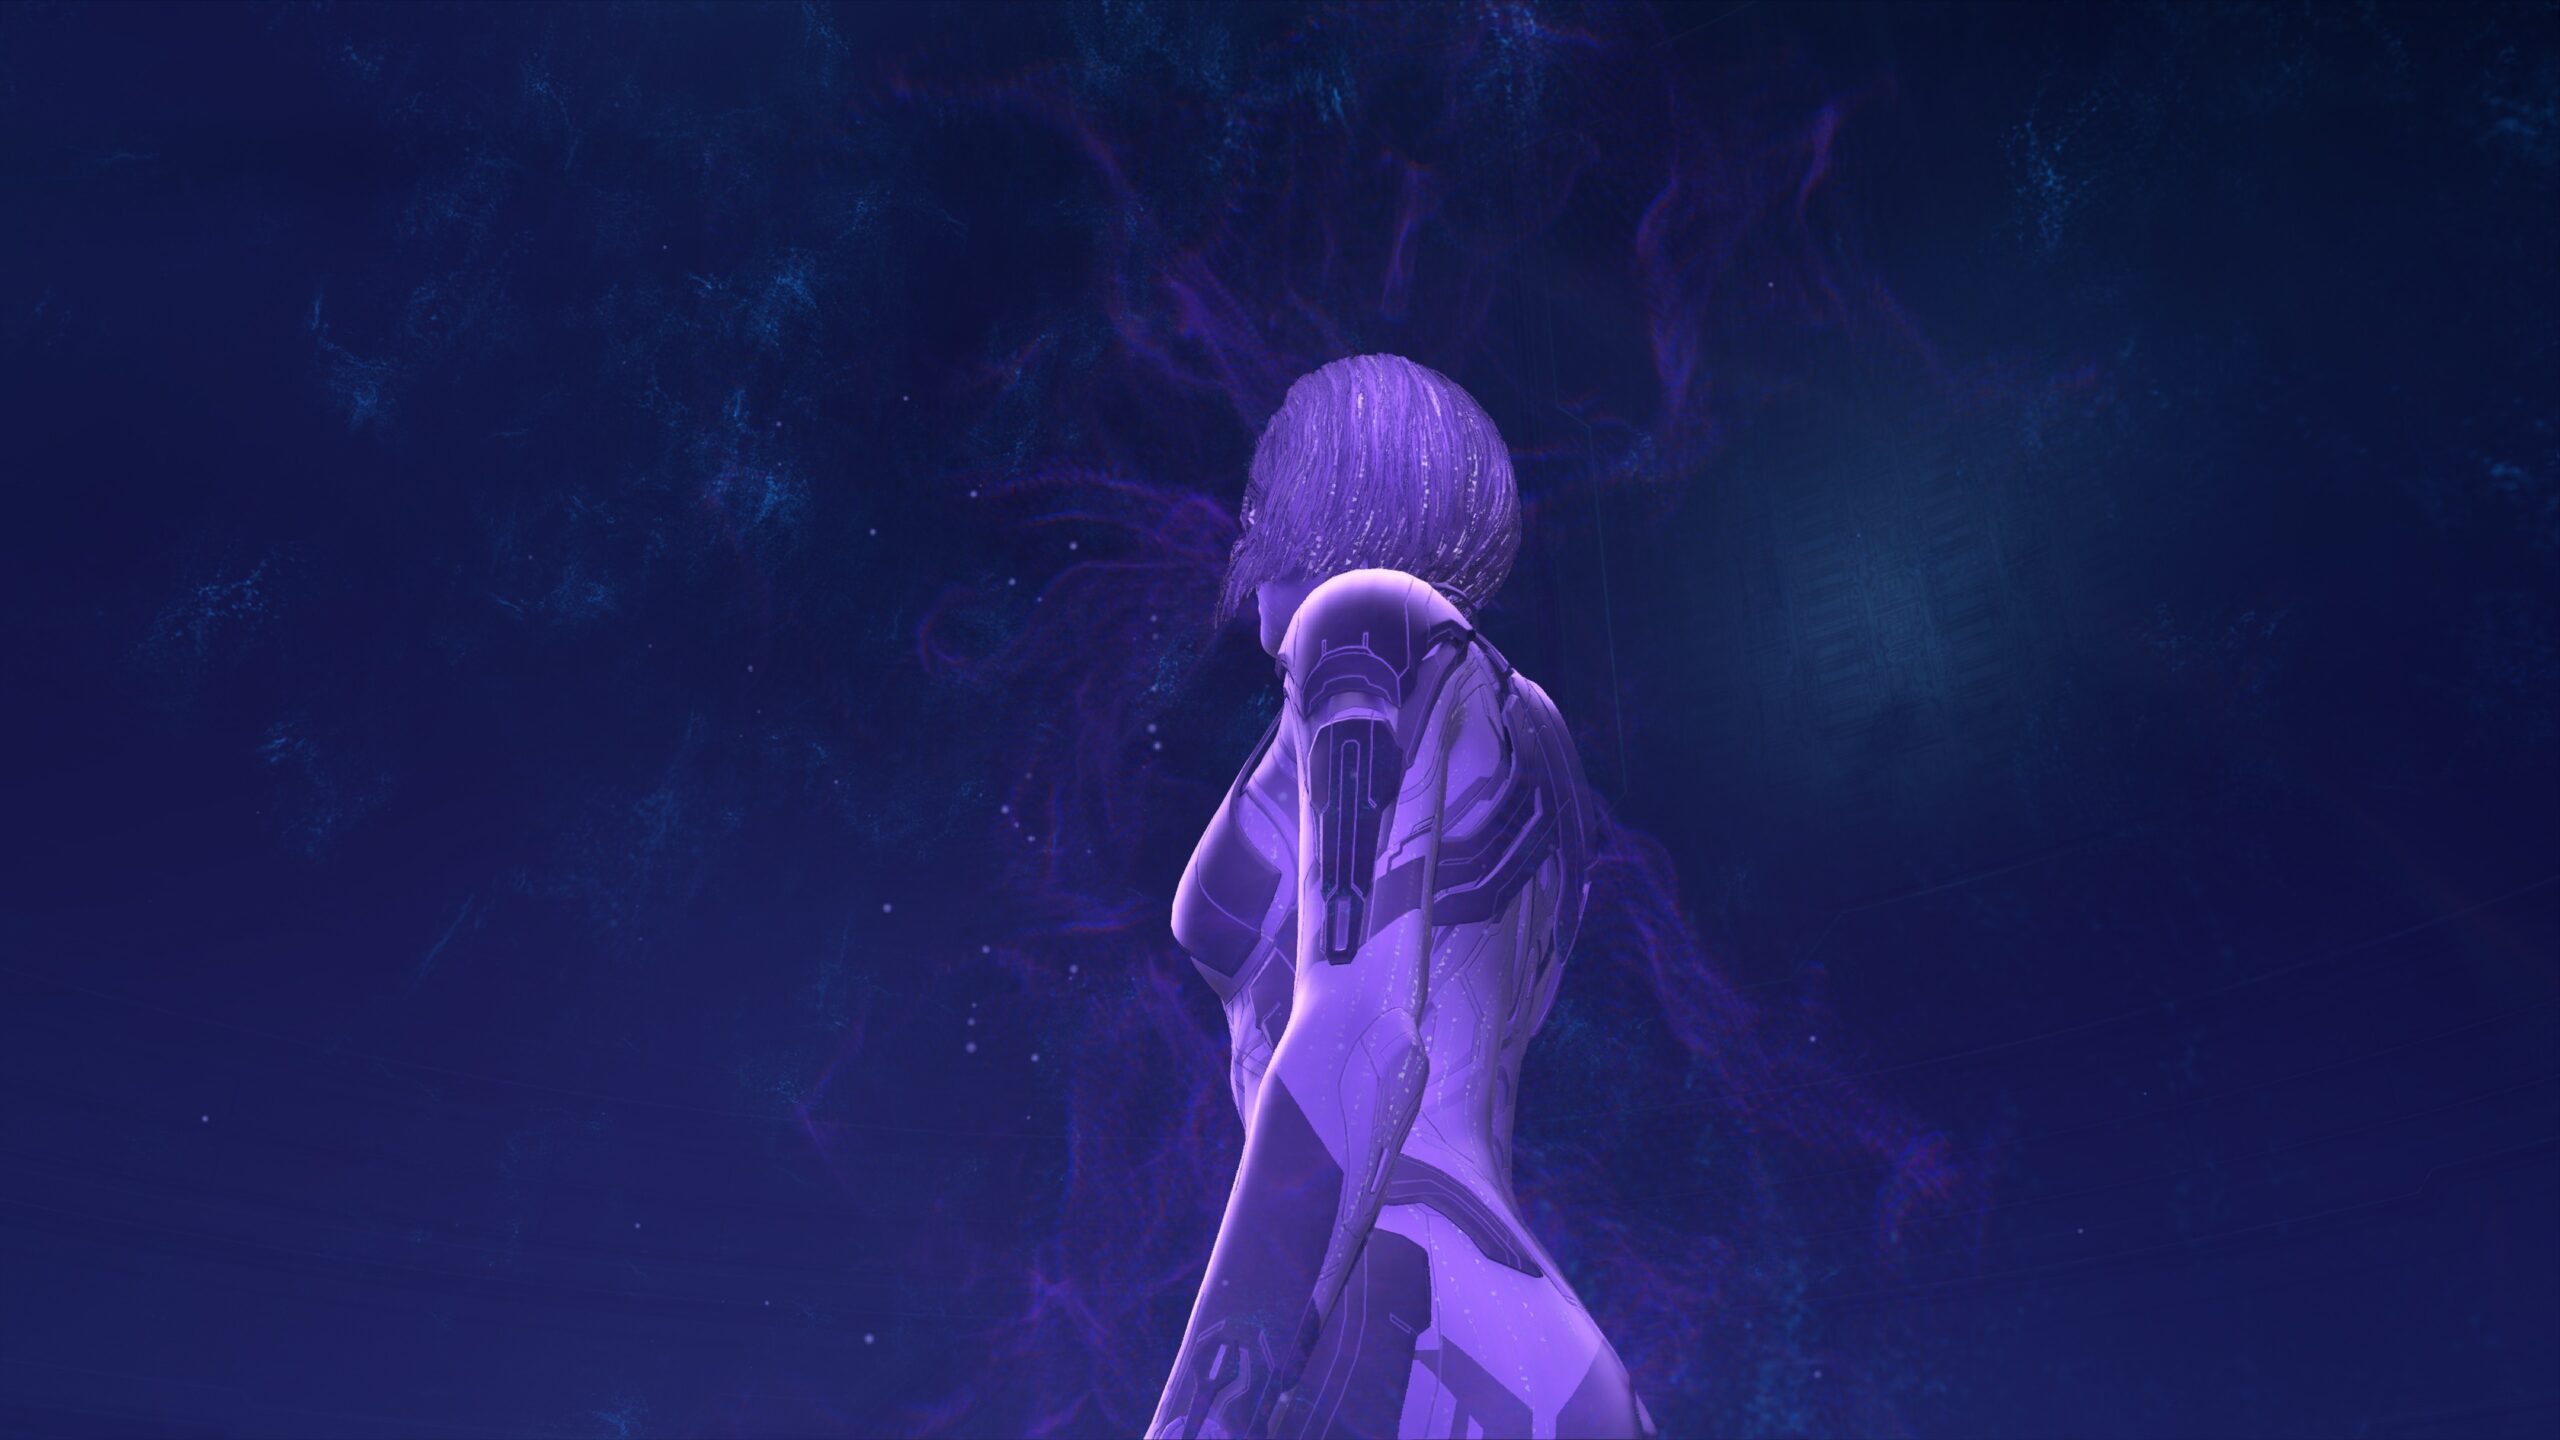 Screenshot of Cortana's ghostly holographic form in Halo Infinite's campaign